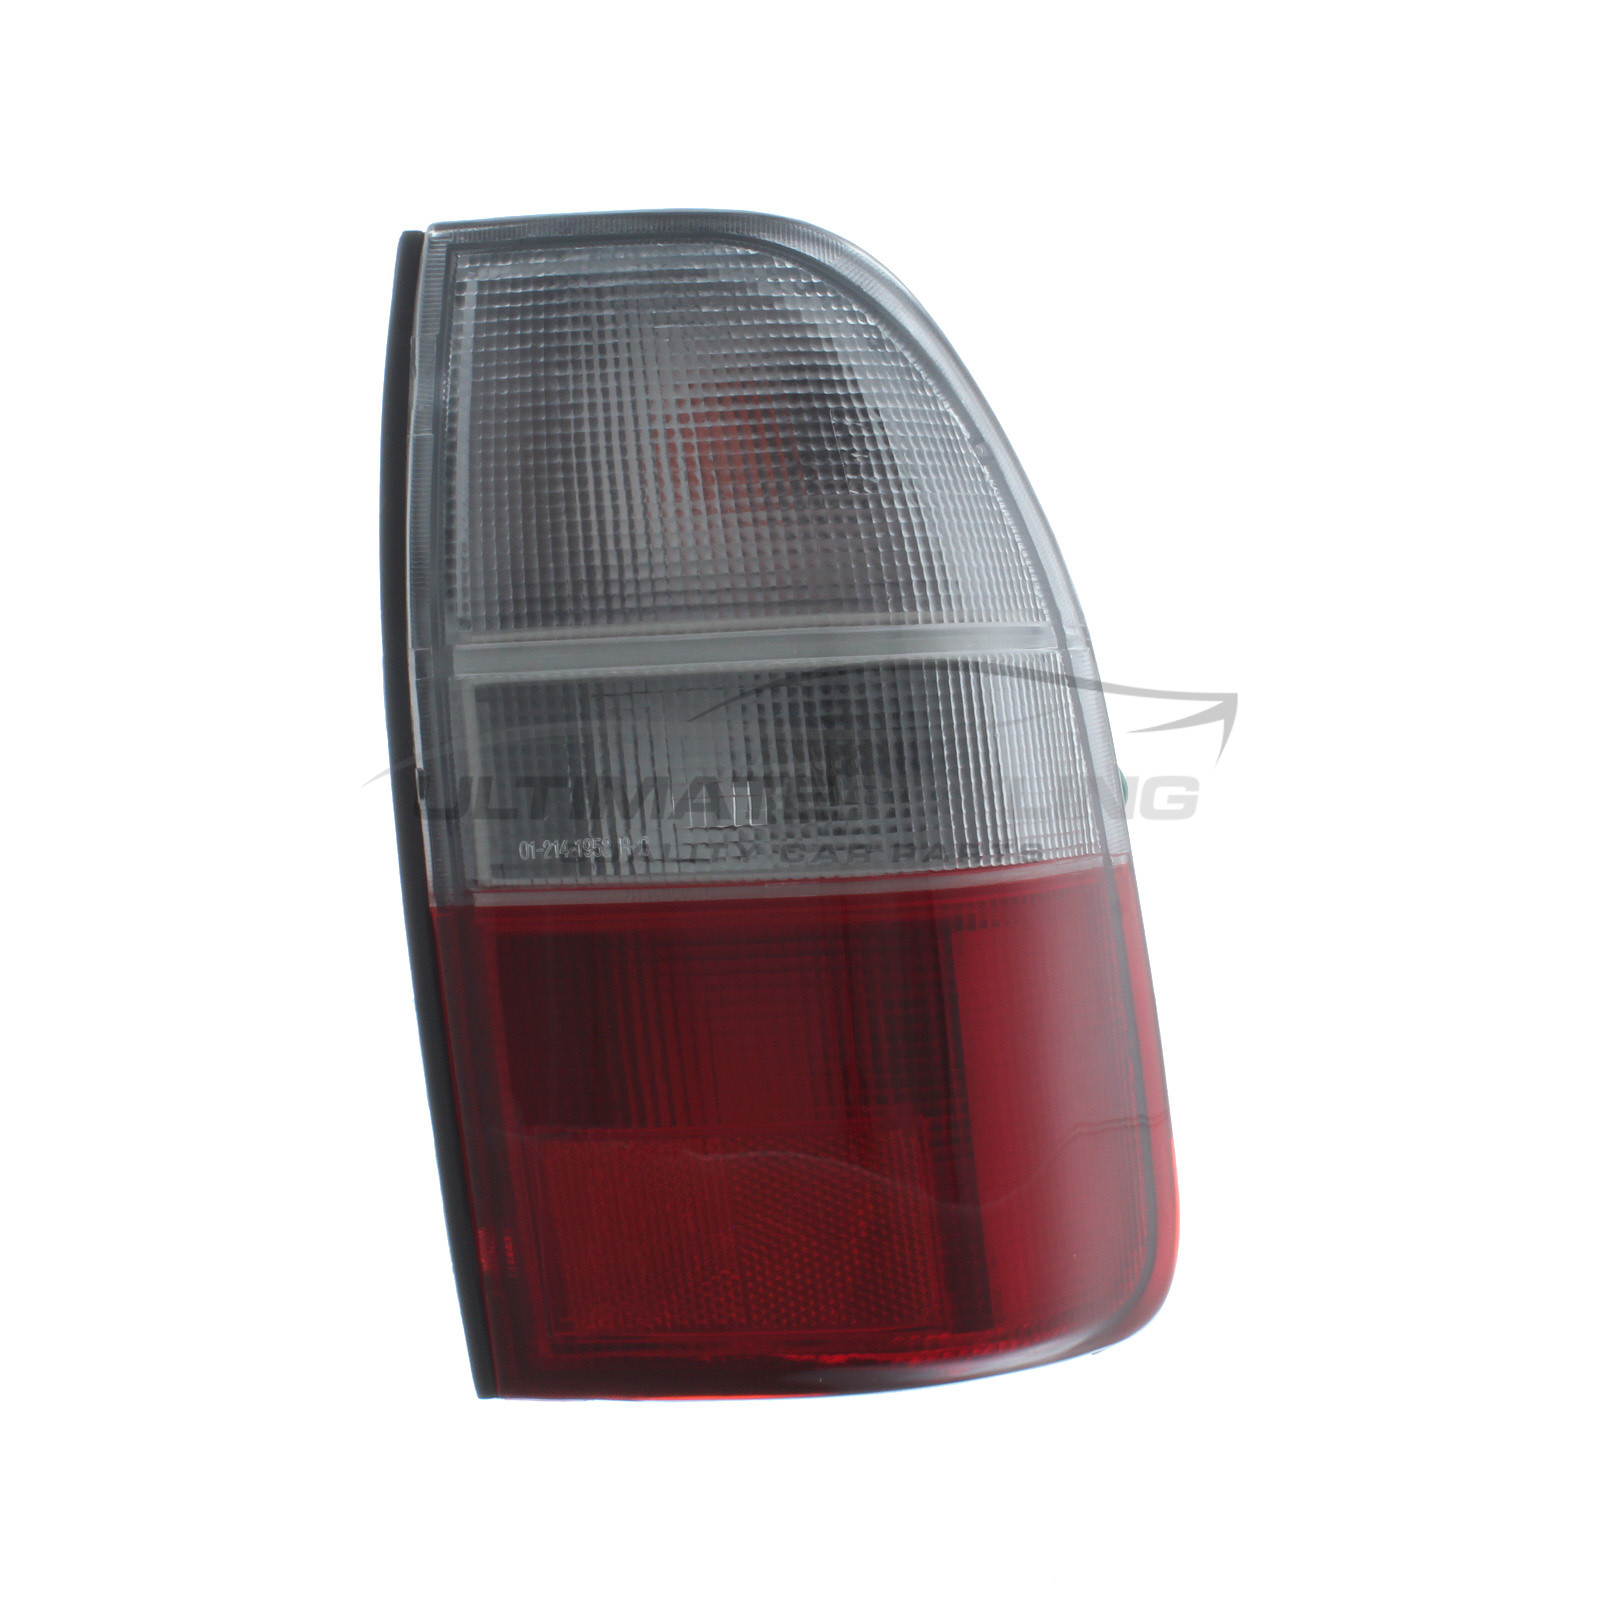 Mitsubishi L200 Rear Back Tail Light Pair Clear Incl Bulbholder 2001-4/2006 